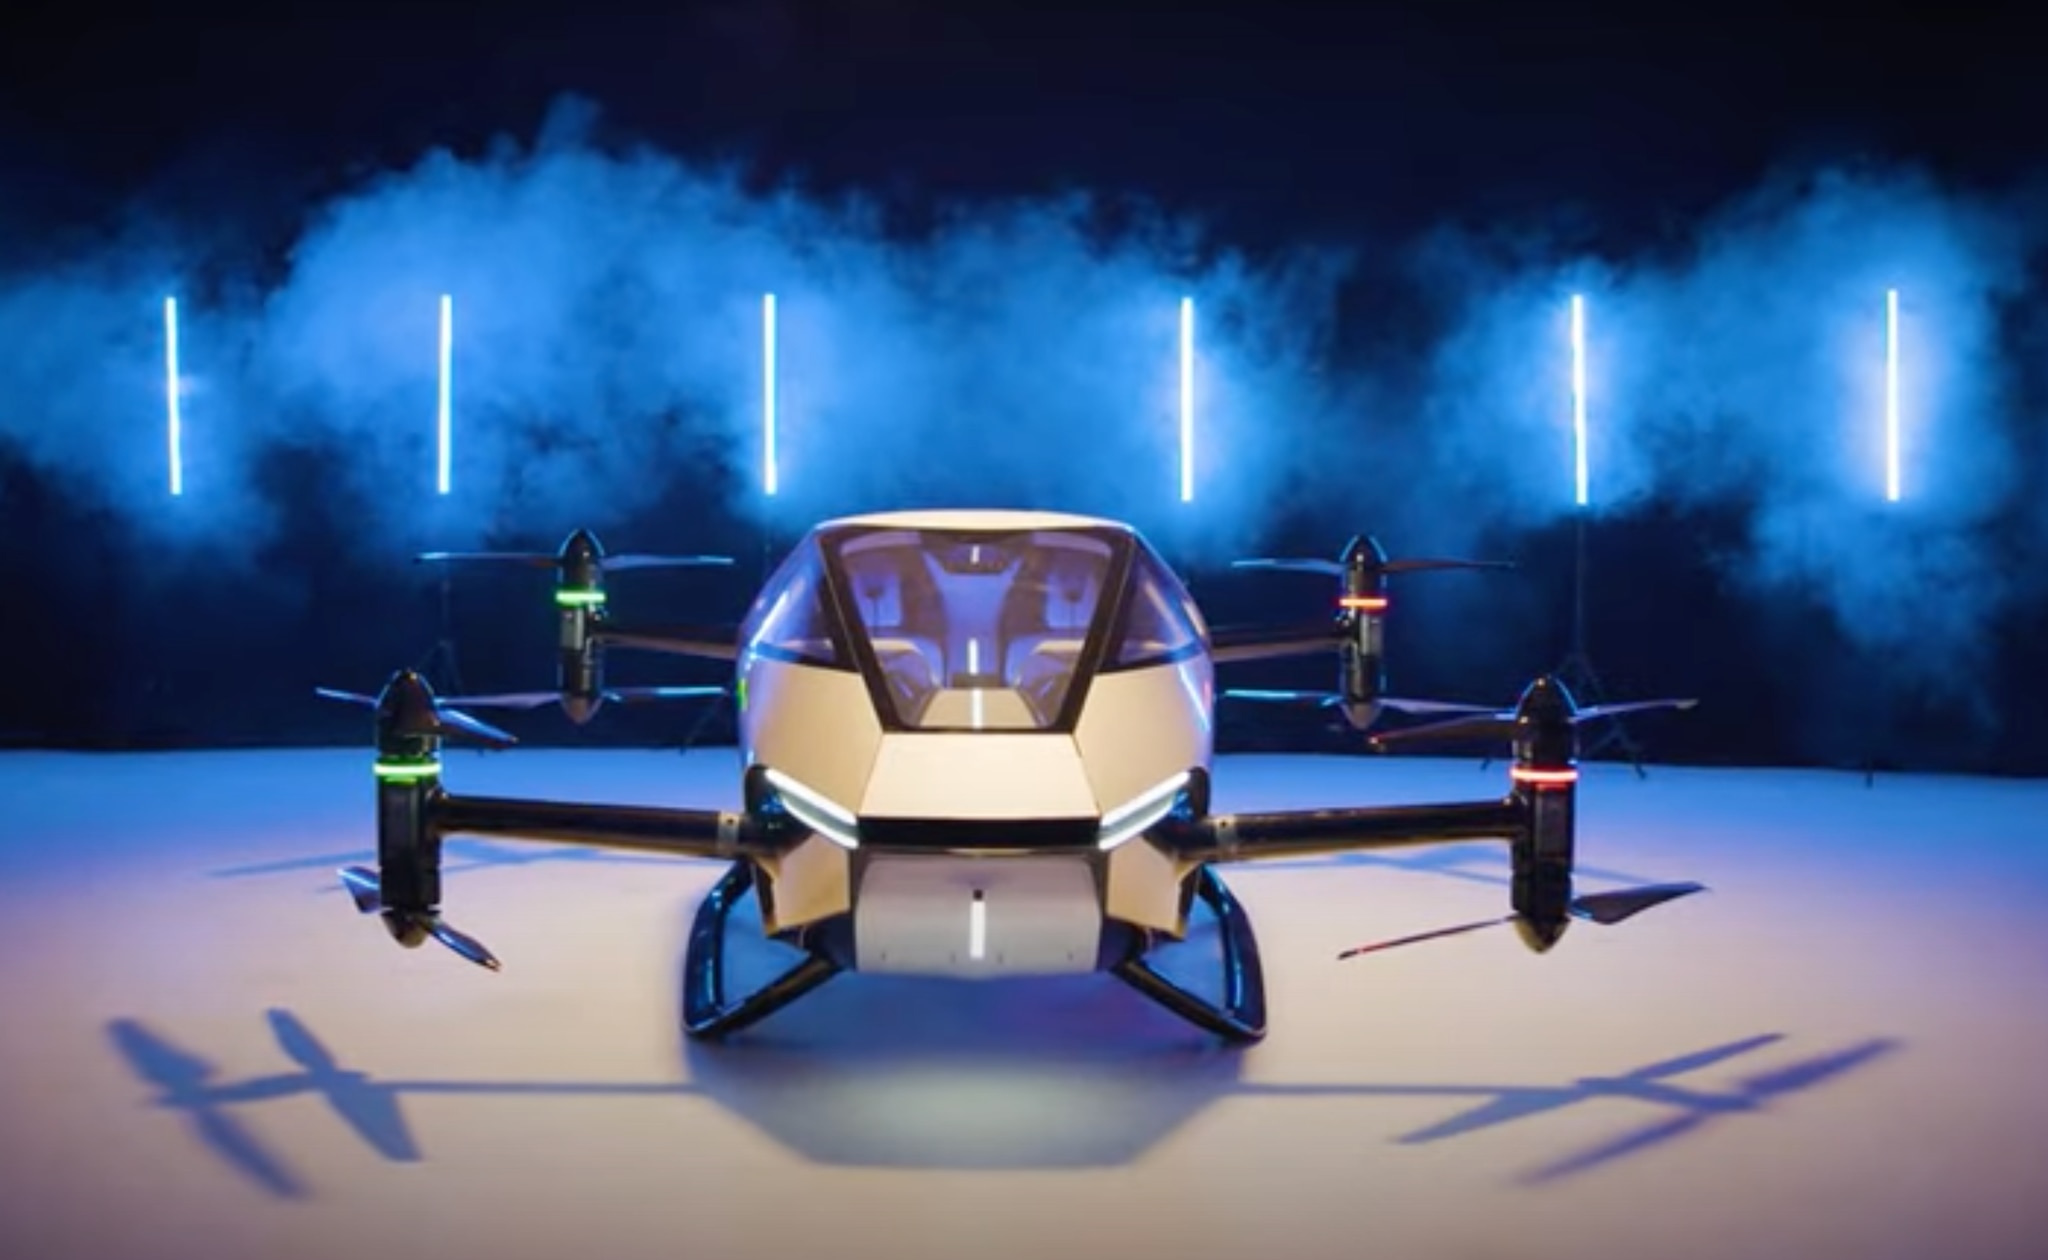 Xpeng X2 is a flying car that looks like a giant drone - Domus